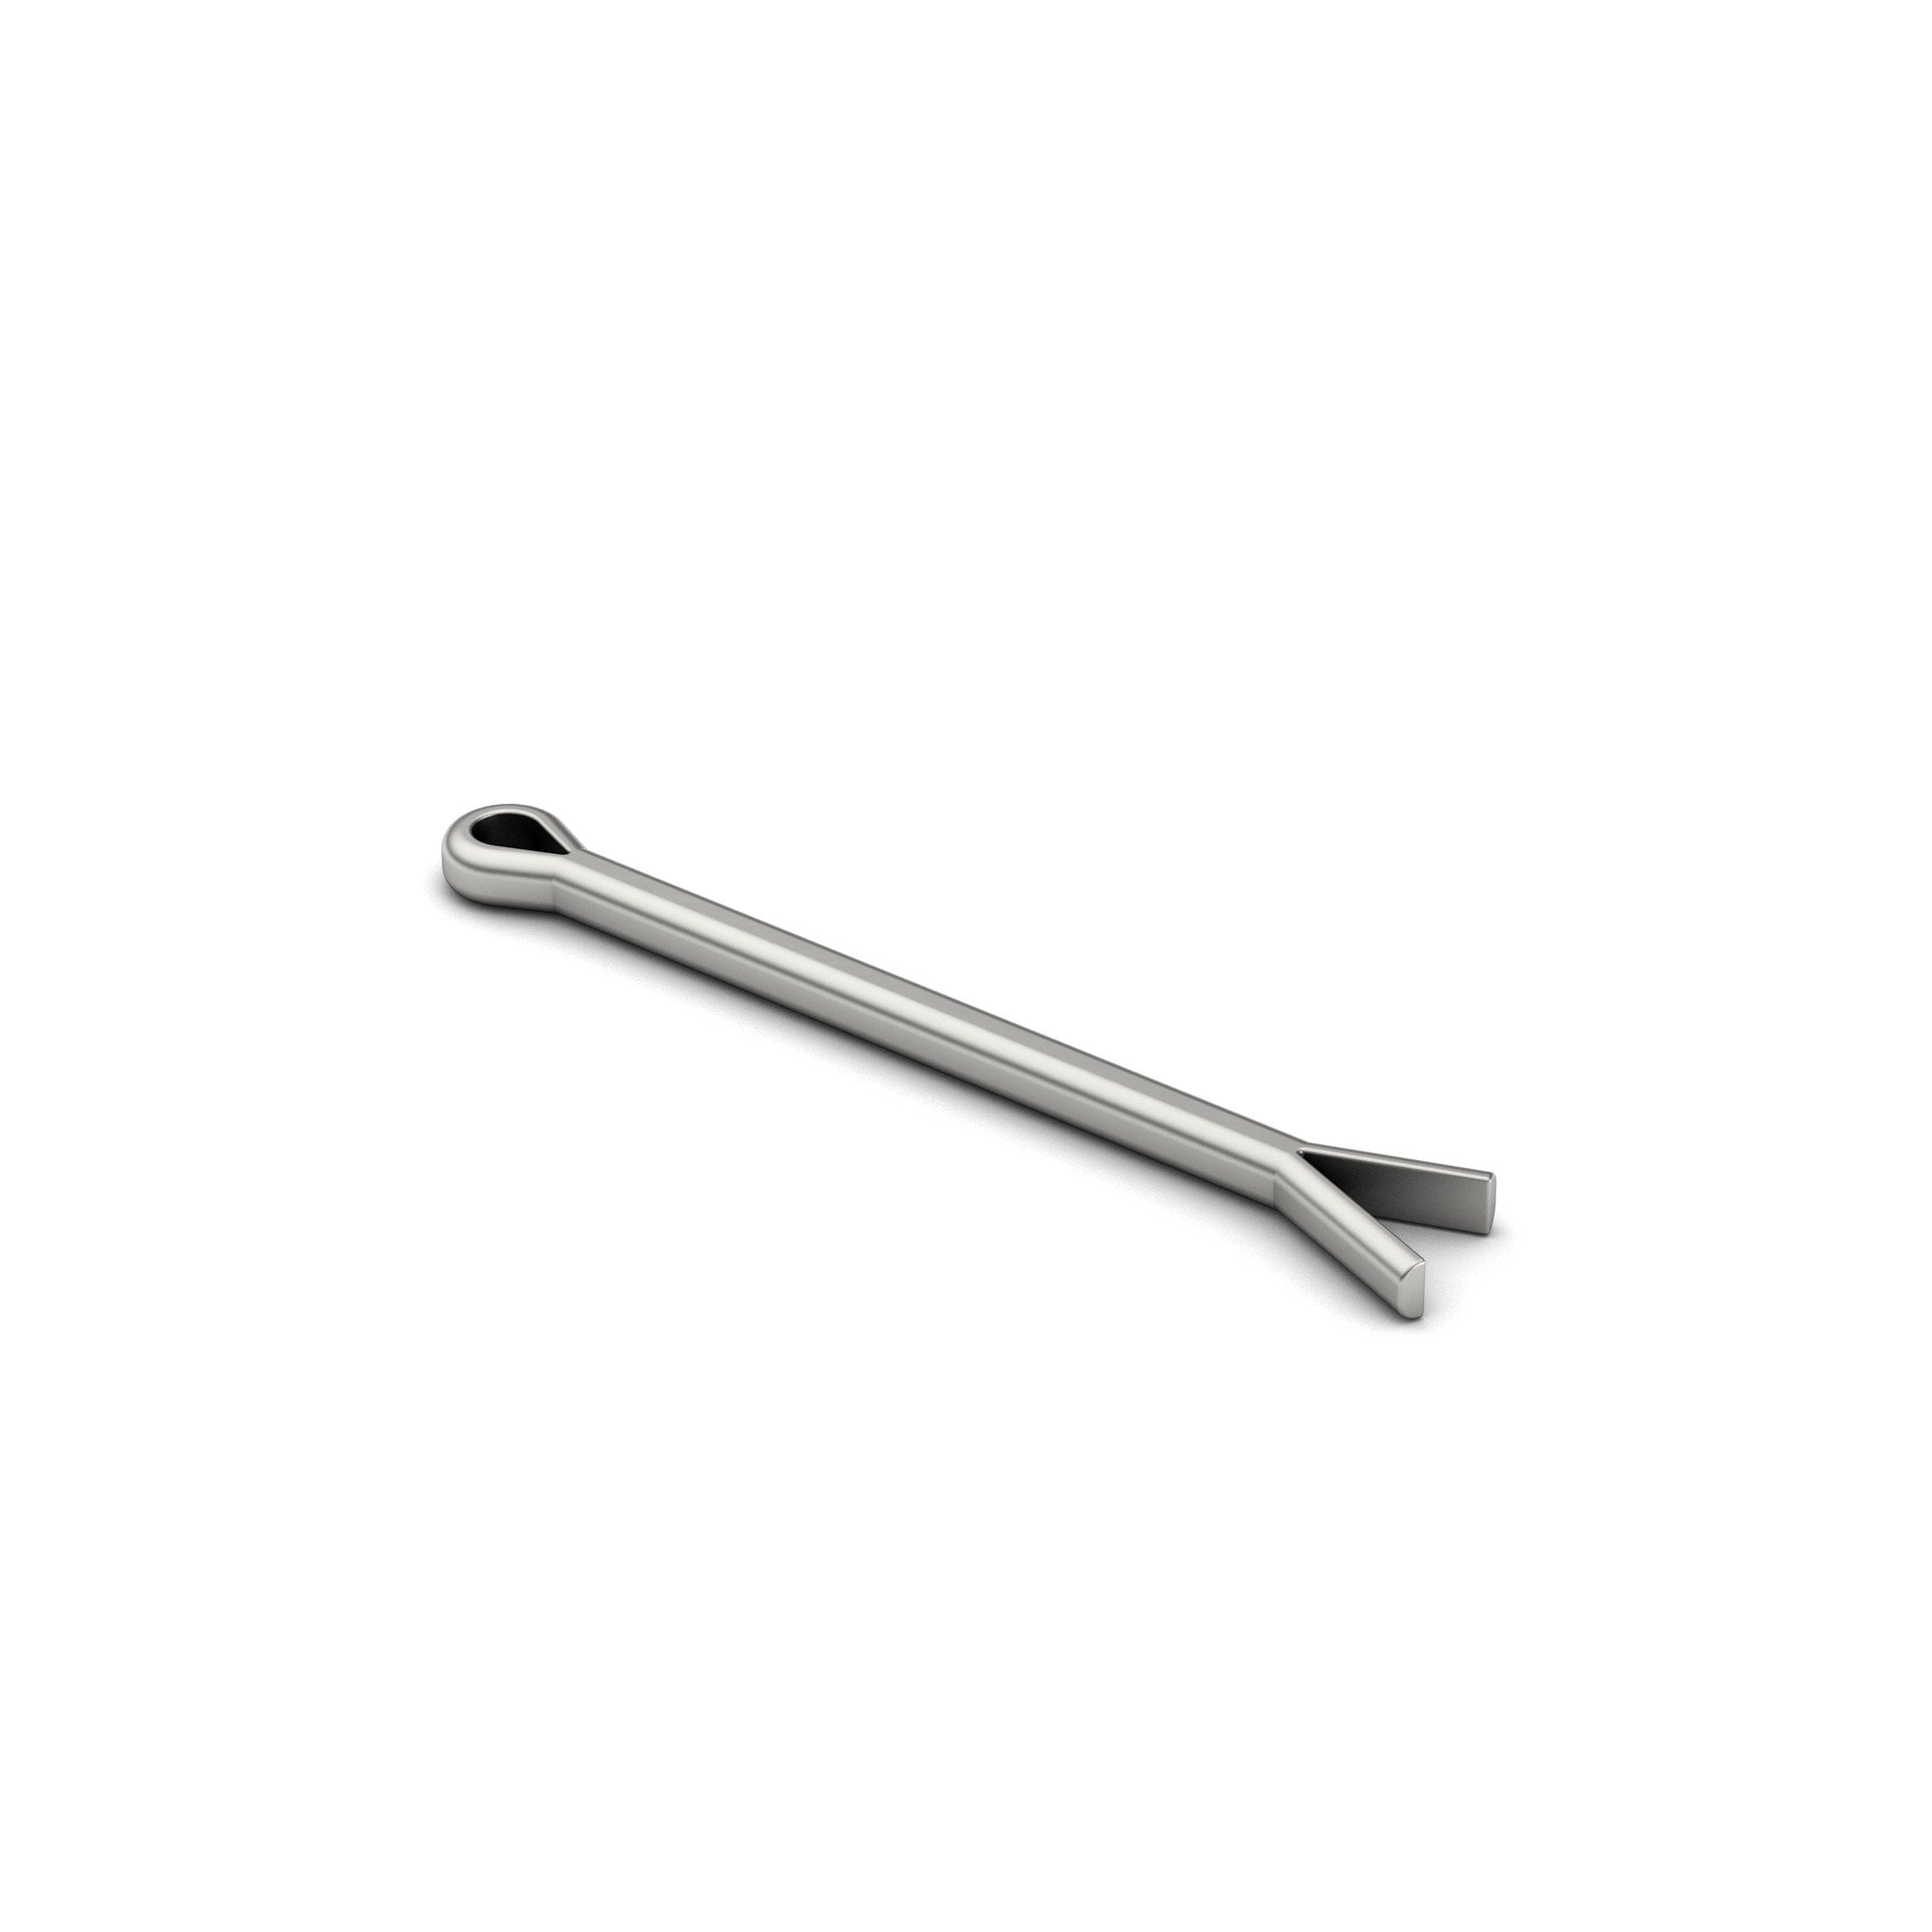 1/4x2 Carbon Steel Cotter Pin Extended Tip Plain Finish